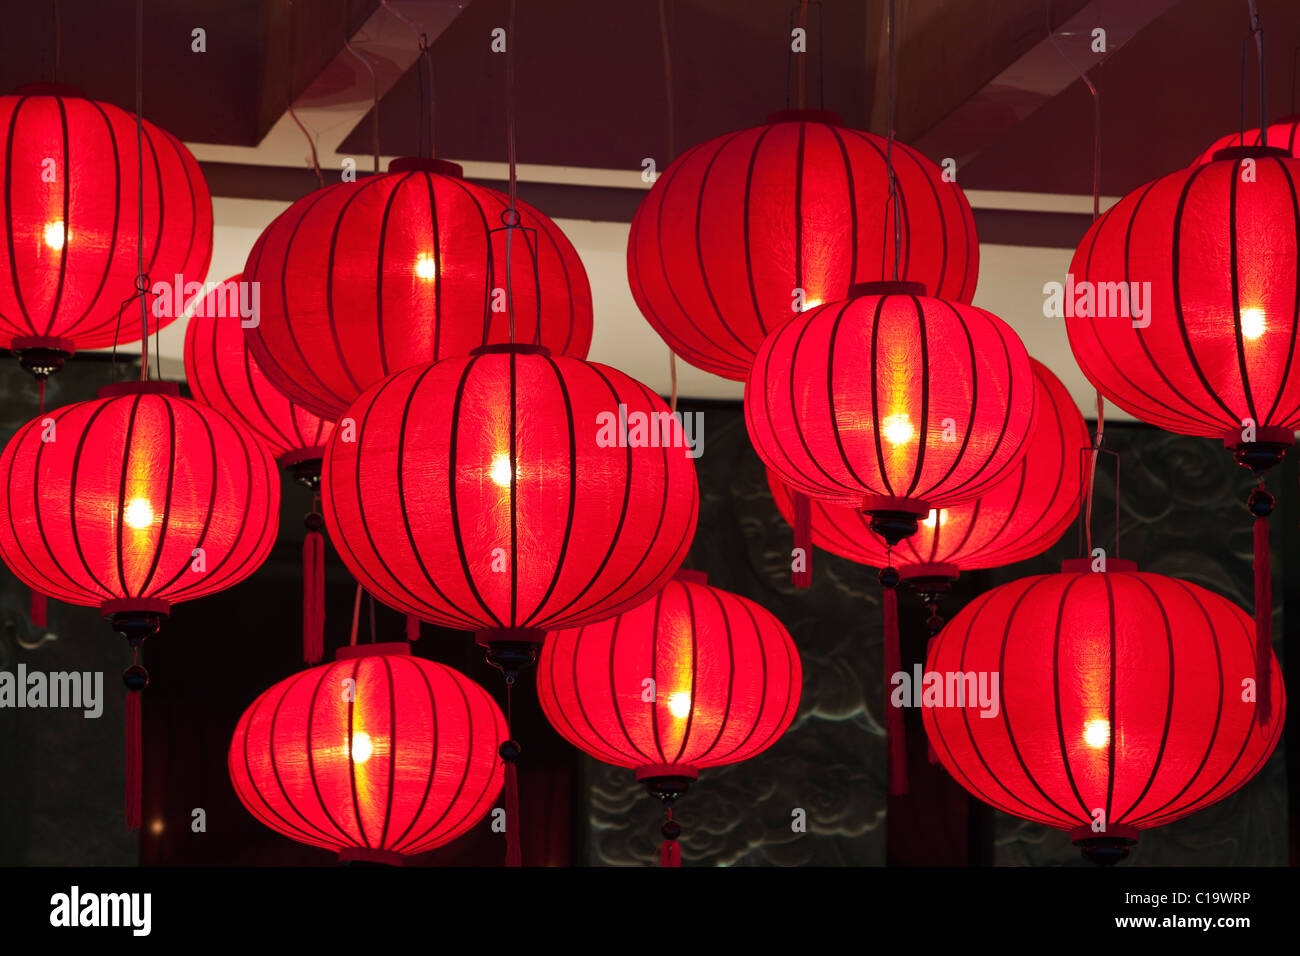 Red lanterns for Chinese New Year, Singapore Stock Photo